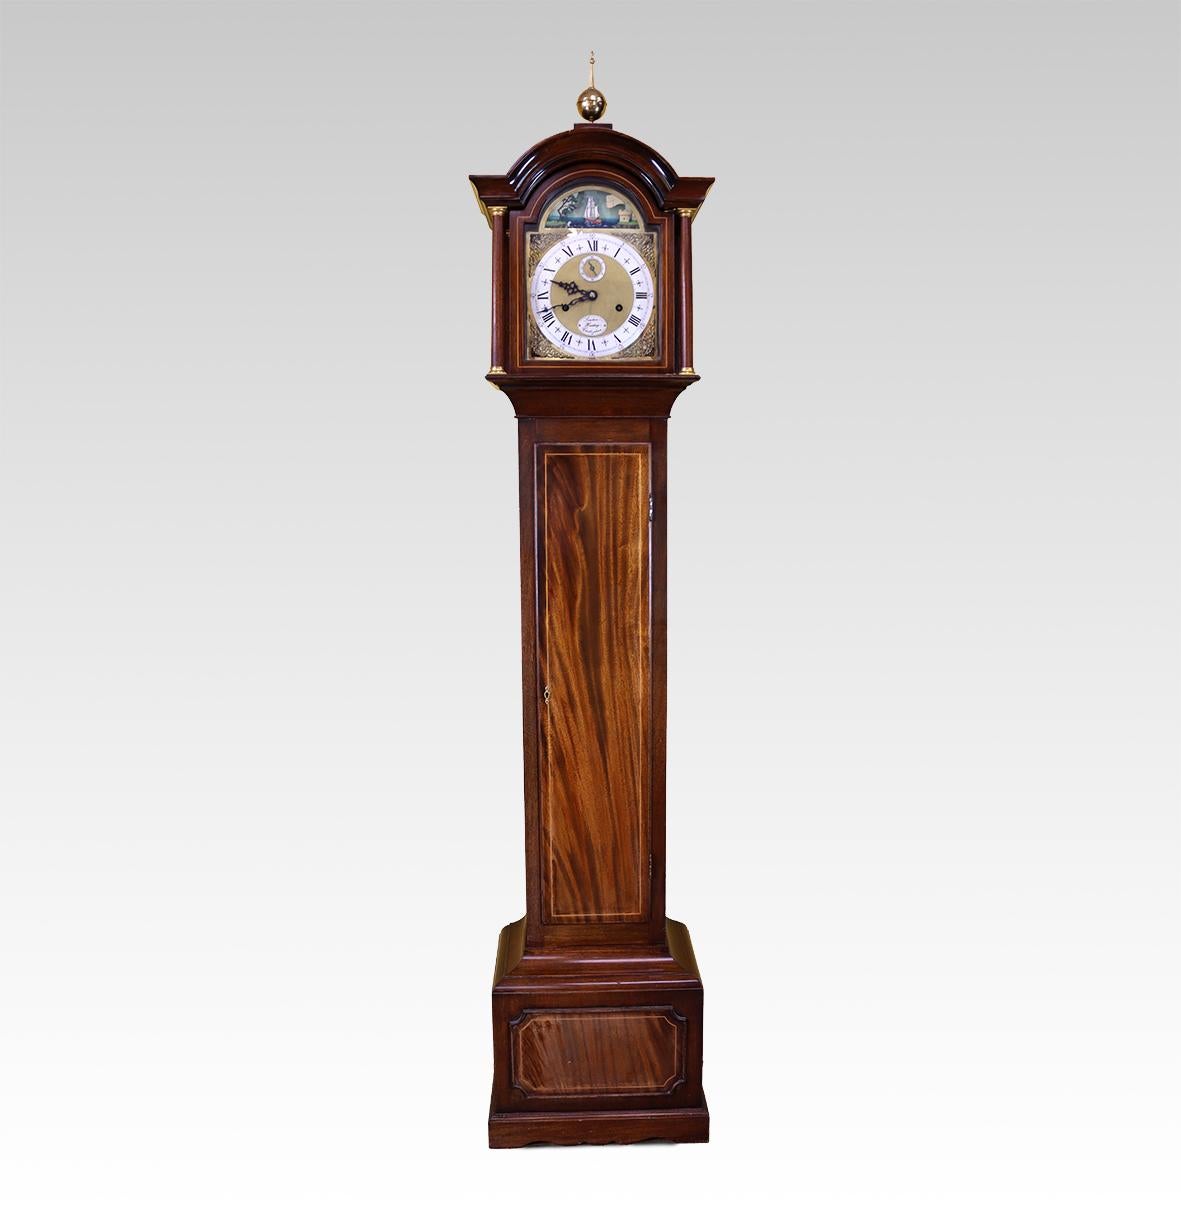 Made by one of the last great english clock makers working in a traditional manner. This miniature longcase has an eight day weight driven movement with an automaton rocking ship in the top arch of the dial (see video). 

The case is made of